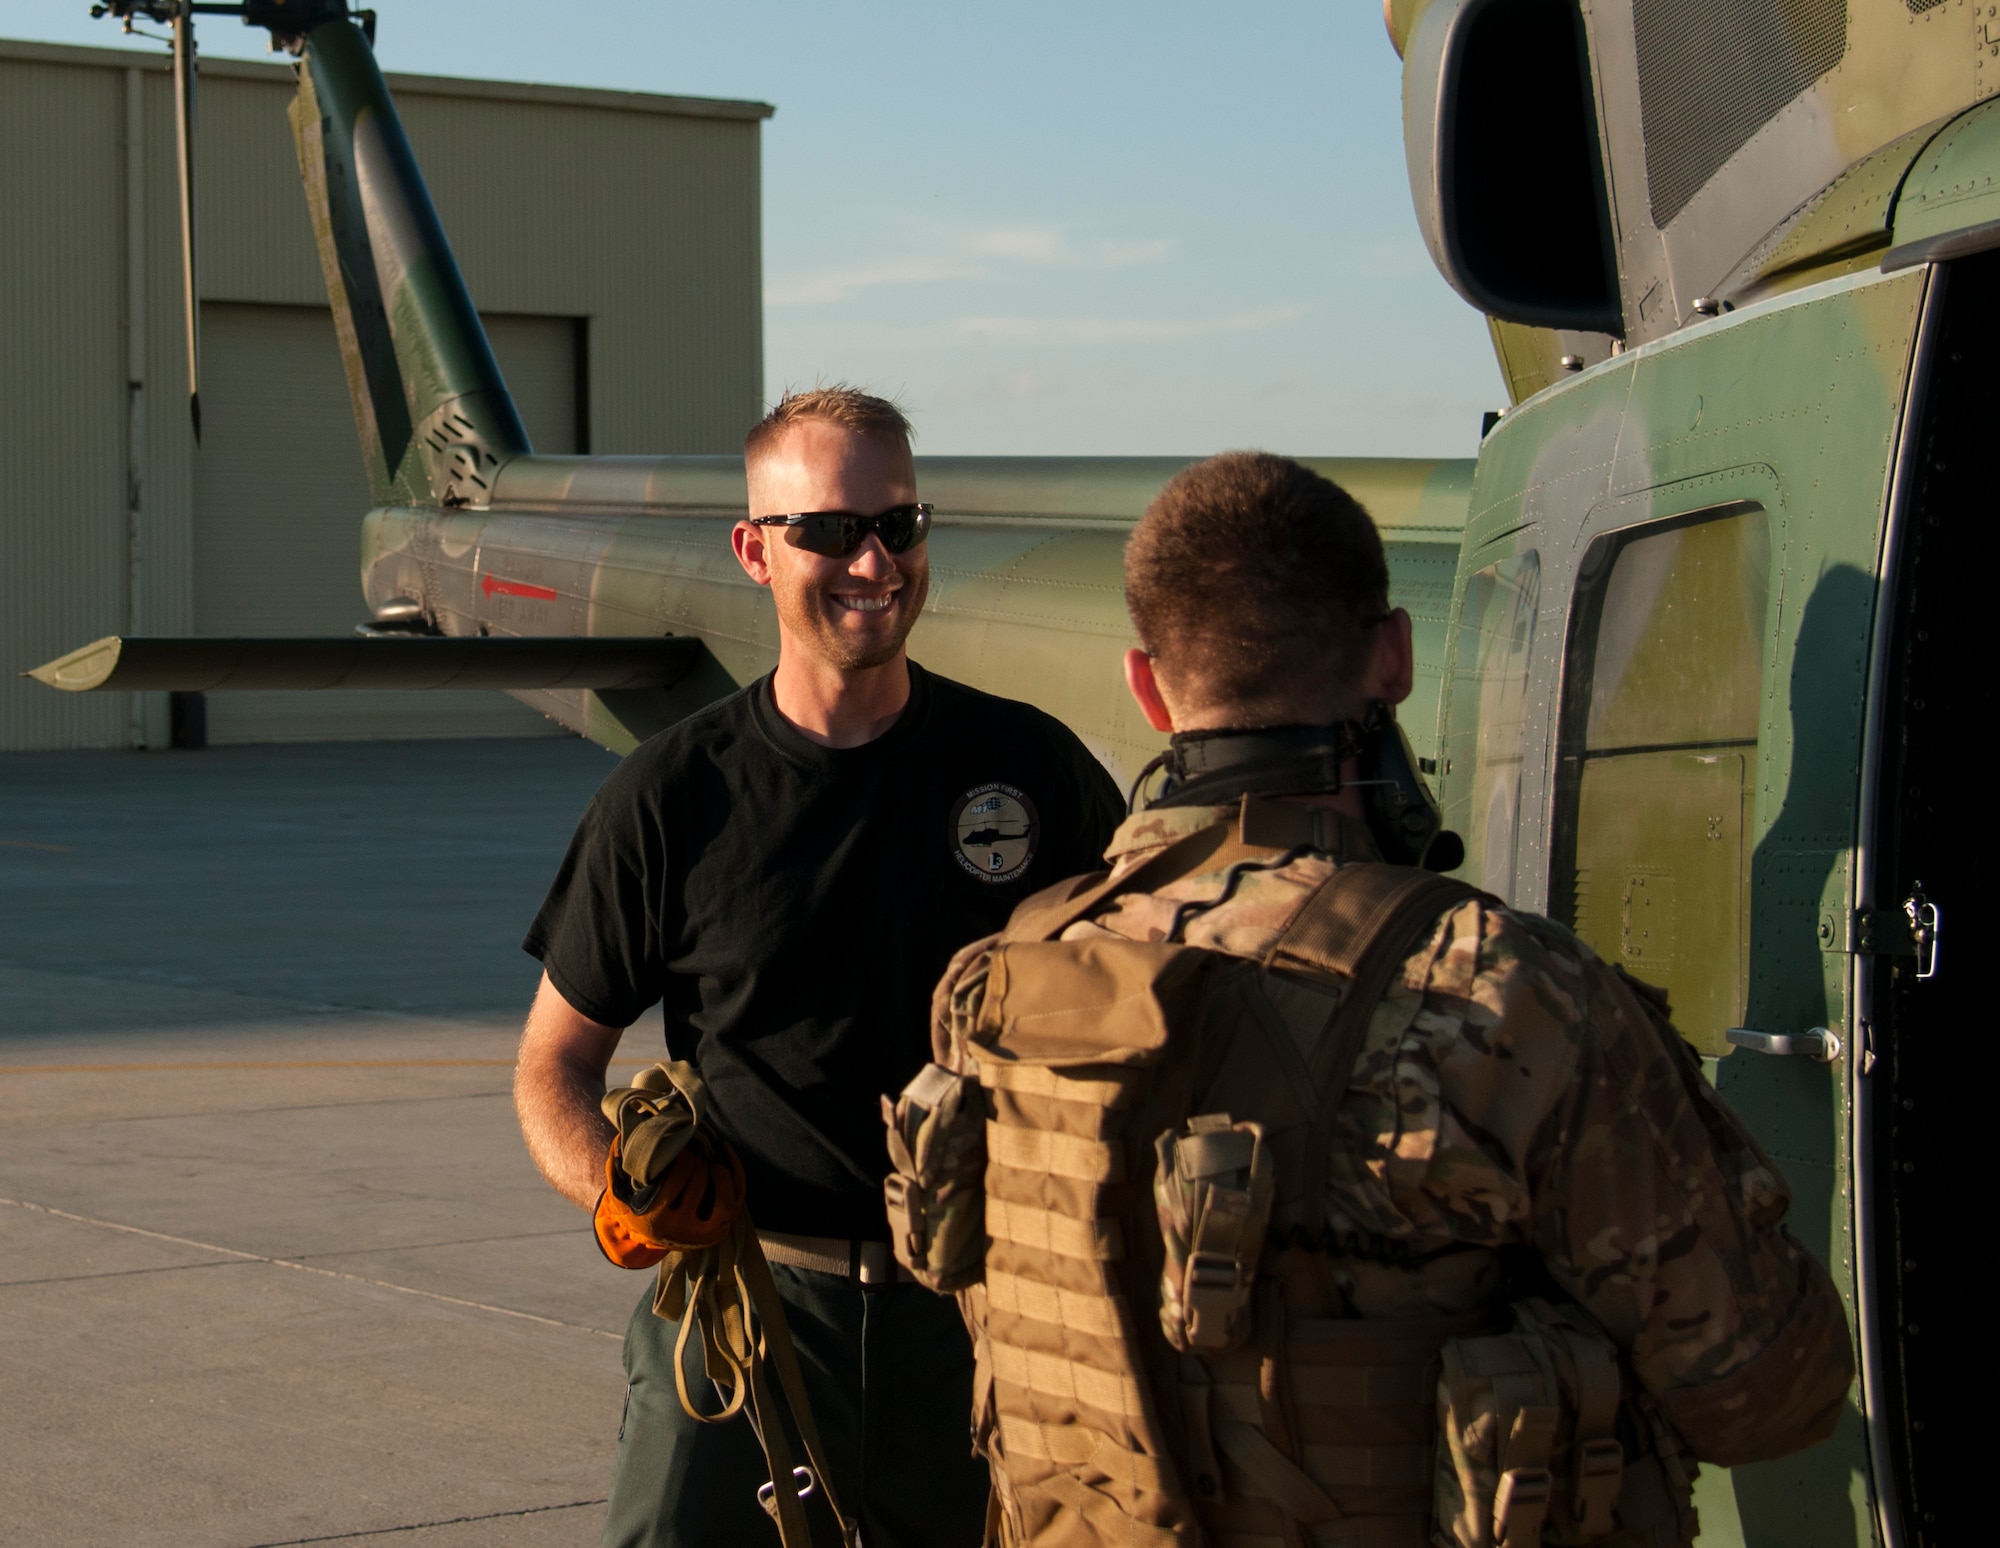 Ben Postma, M1 Support Services aircraft mechanic, talks with a 790th Missile Security Forces Squadron Tactical Response Force Airman on F.E. Warren Air Force Base, Wyo., June 12, 2015. The defender just returned from the 90th Missile Wing Missile Complex on the UH-1N “Huey” Bell Helicopter that Postma was preparing to inspect. (U.S. Air Force photo by Senior Airman Jason Wiese)